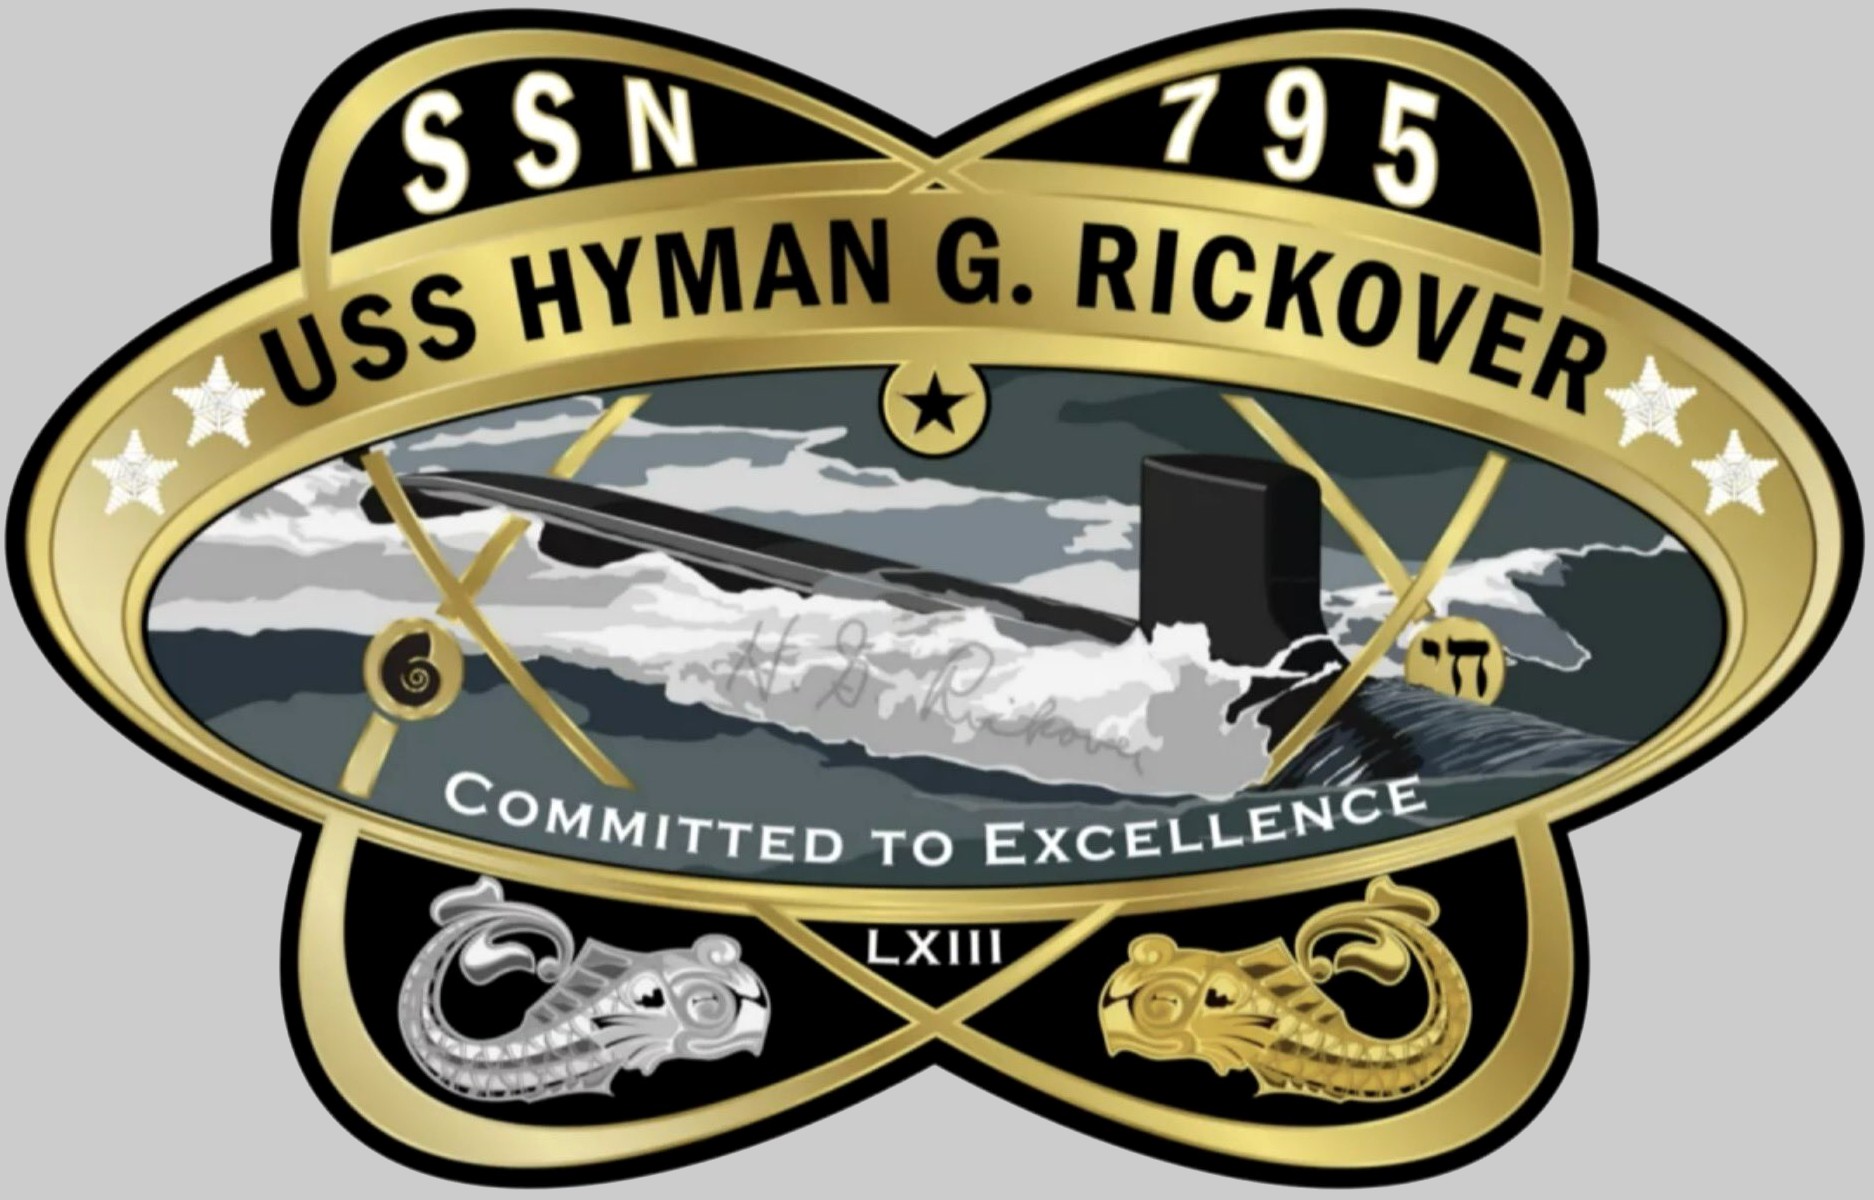 ssn-795 uss hyman g. rickover insignia crest patch badge virginia class attack submarine us navy 02x